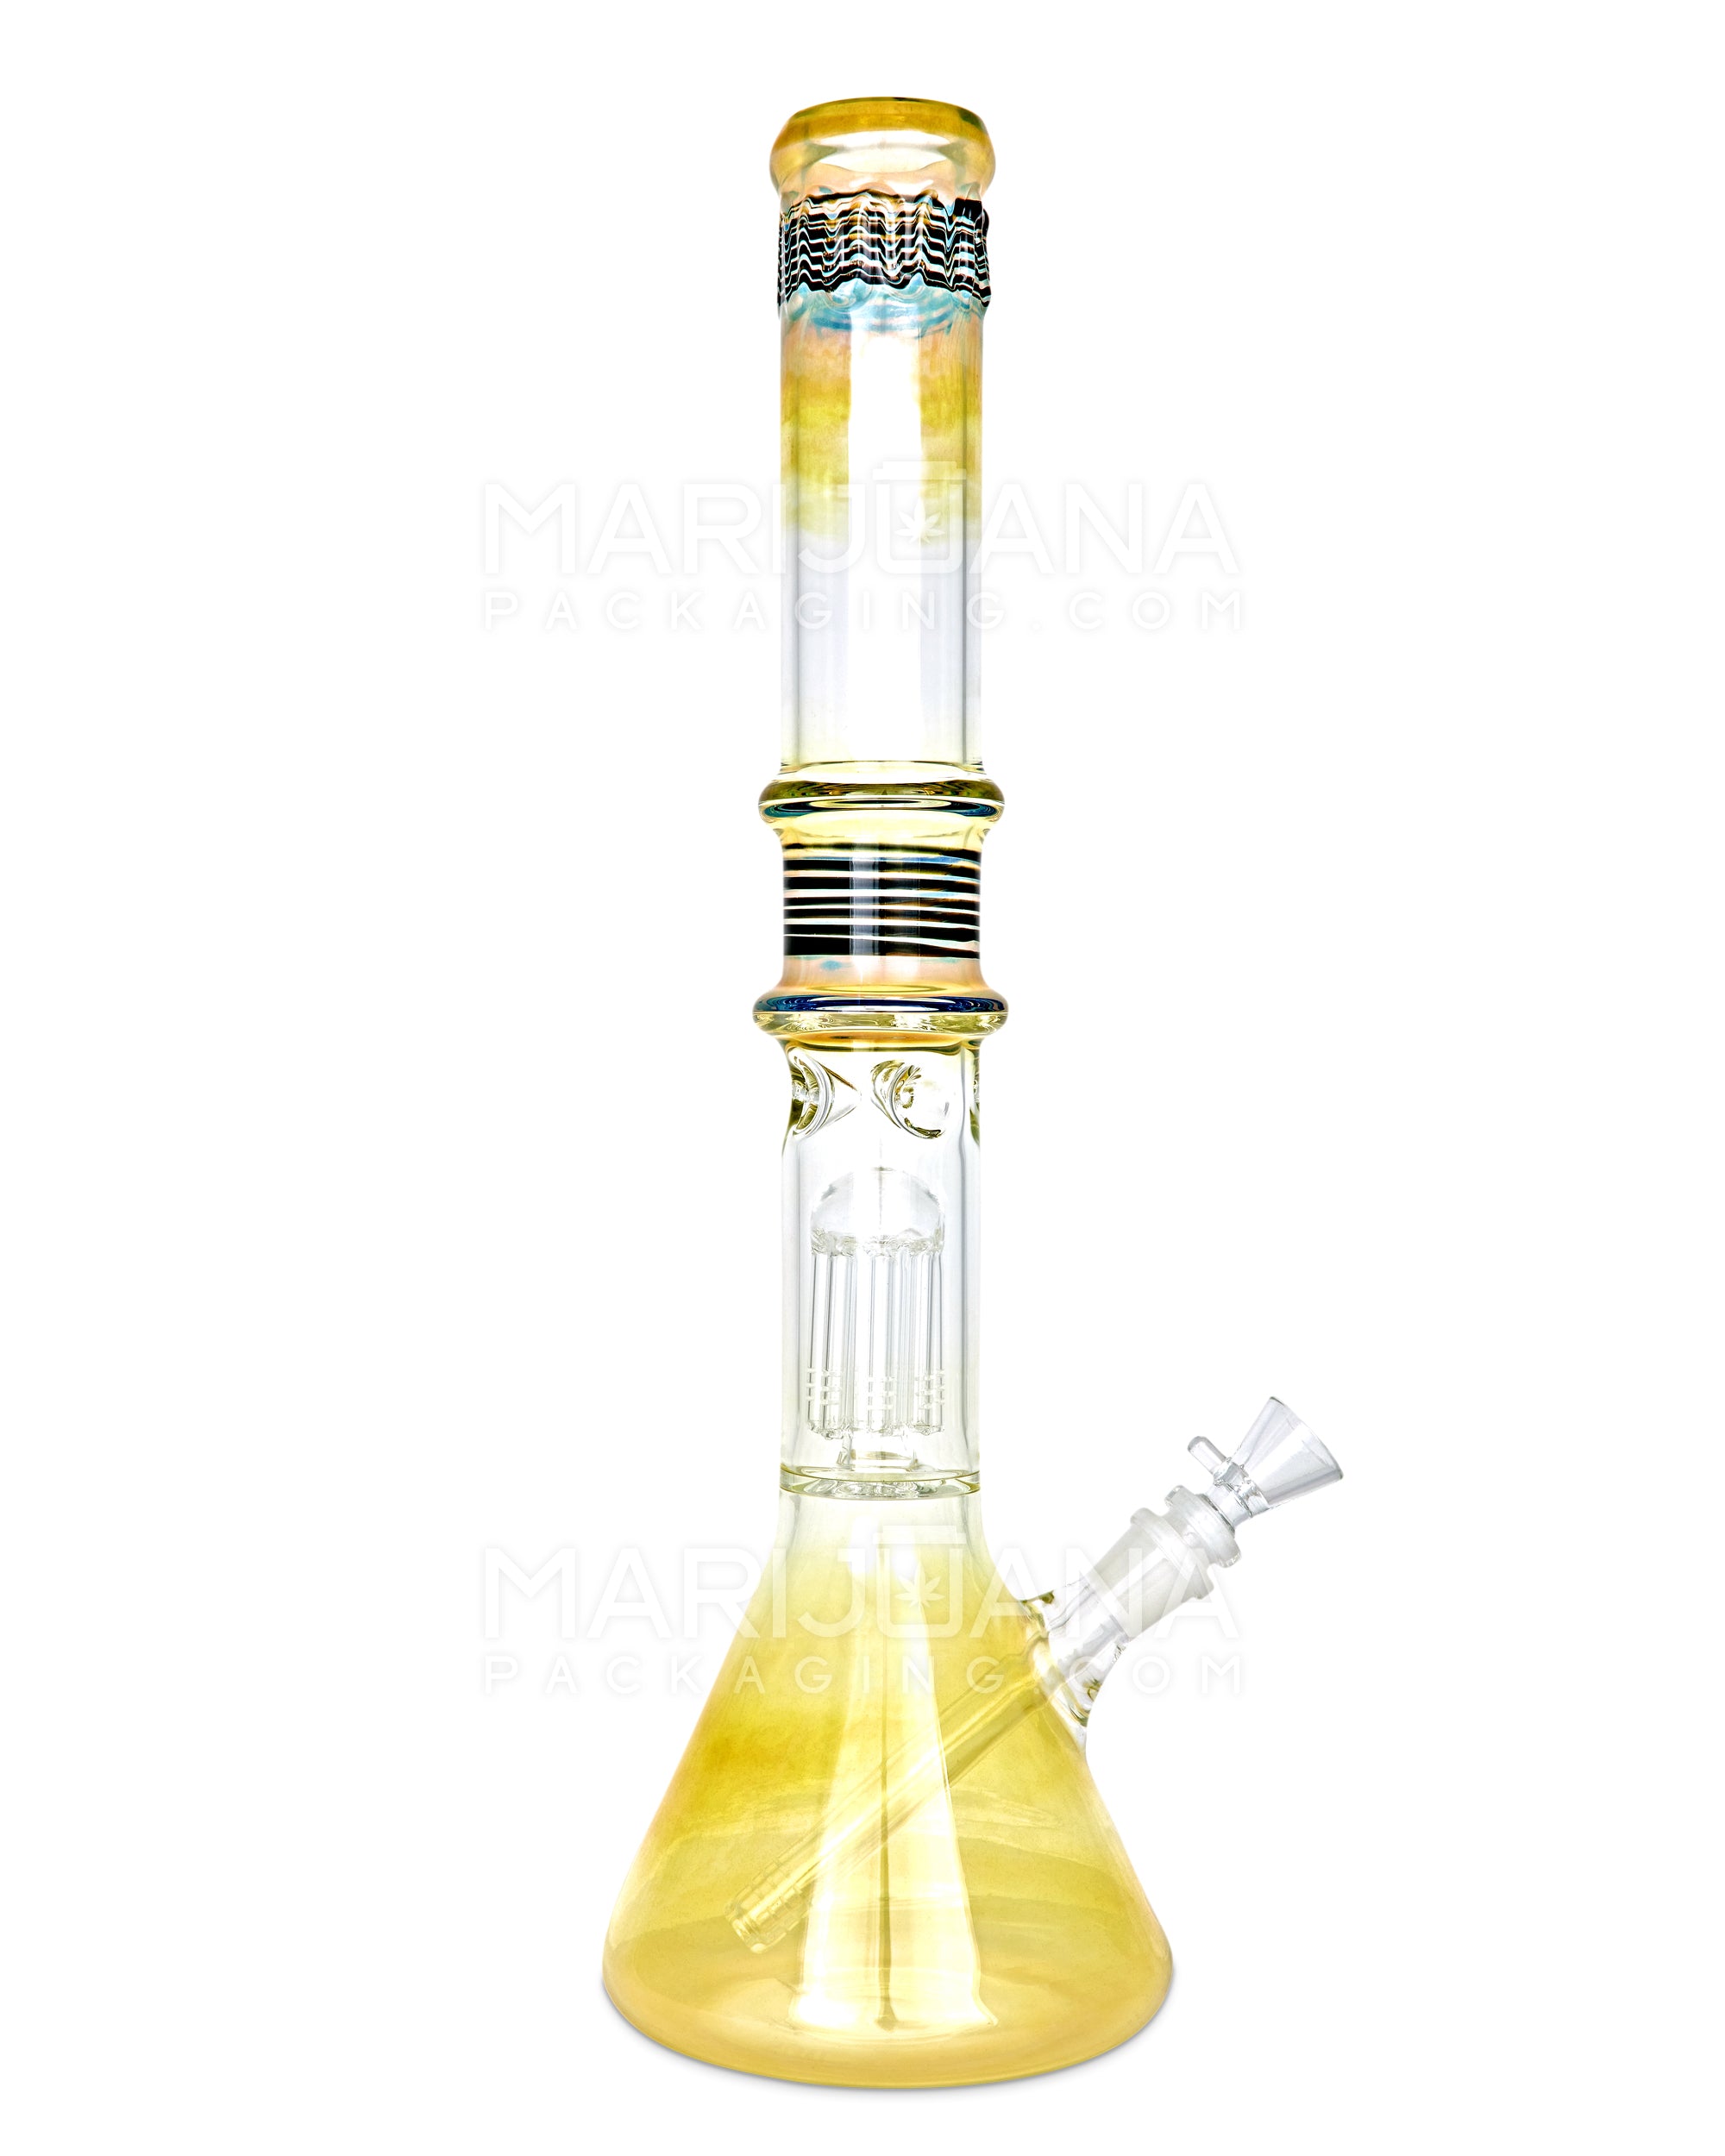 USA Glass | Straight Neck Tree Perc Fumed Glass Beaker Water Pipe w/ Ice Catcher | 18in Tall - 18mm Bowl - Black - 1